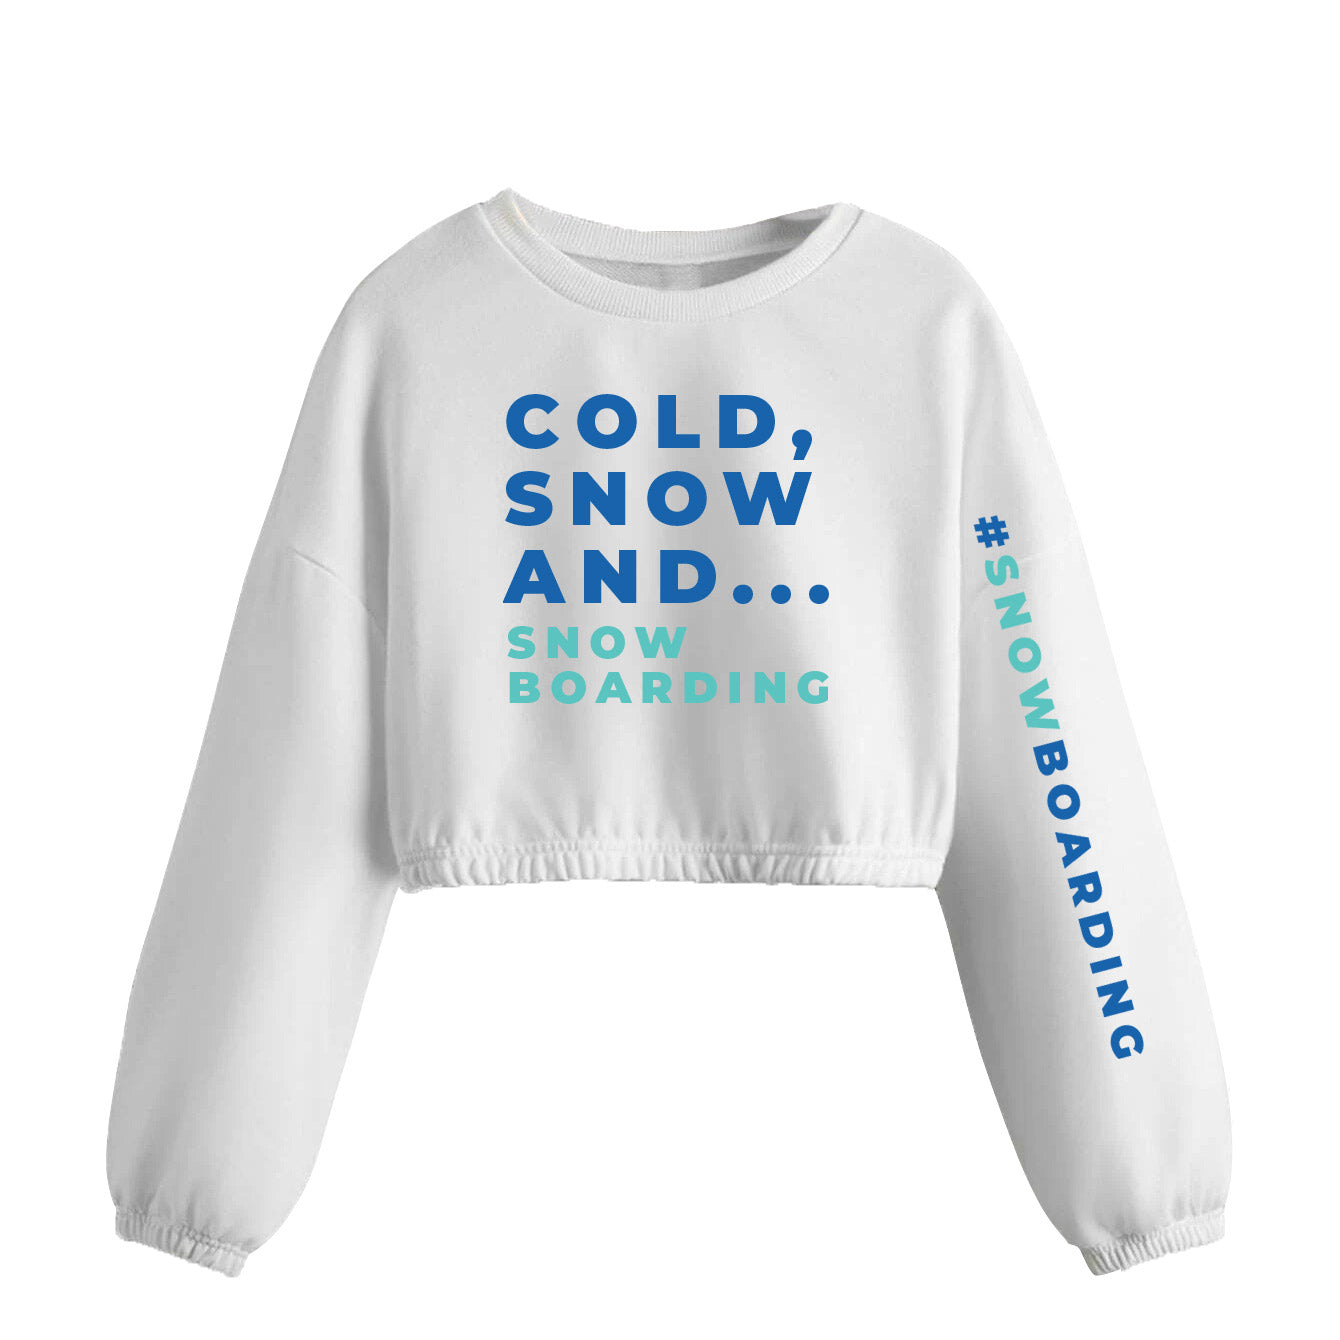 COLD, SNOW AND...SNOWBOARDING Girls, Teen, Kids White crop top FABVOKAB